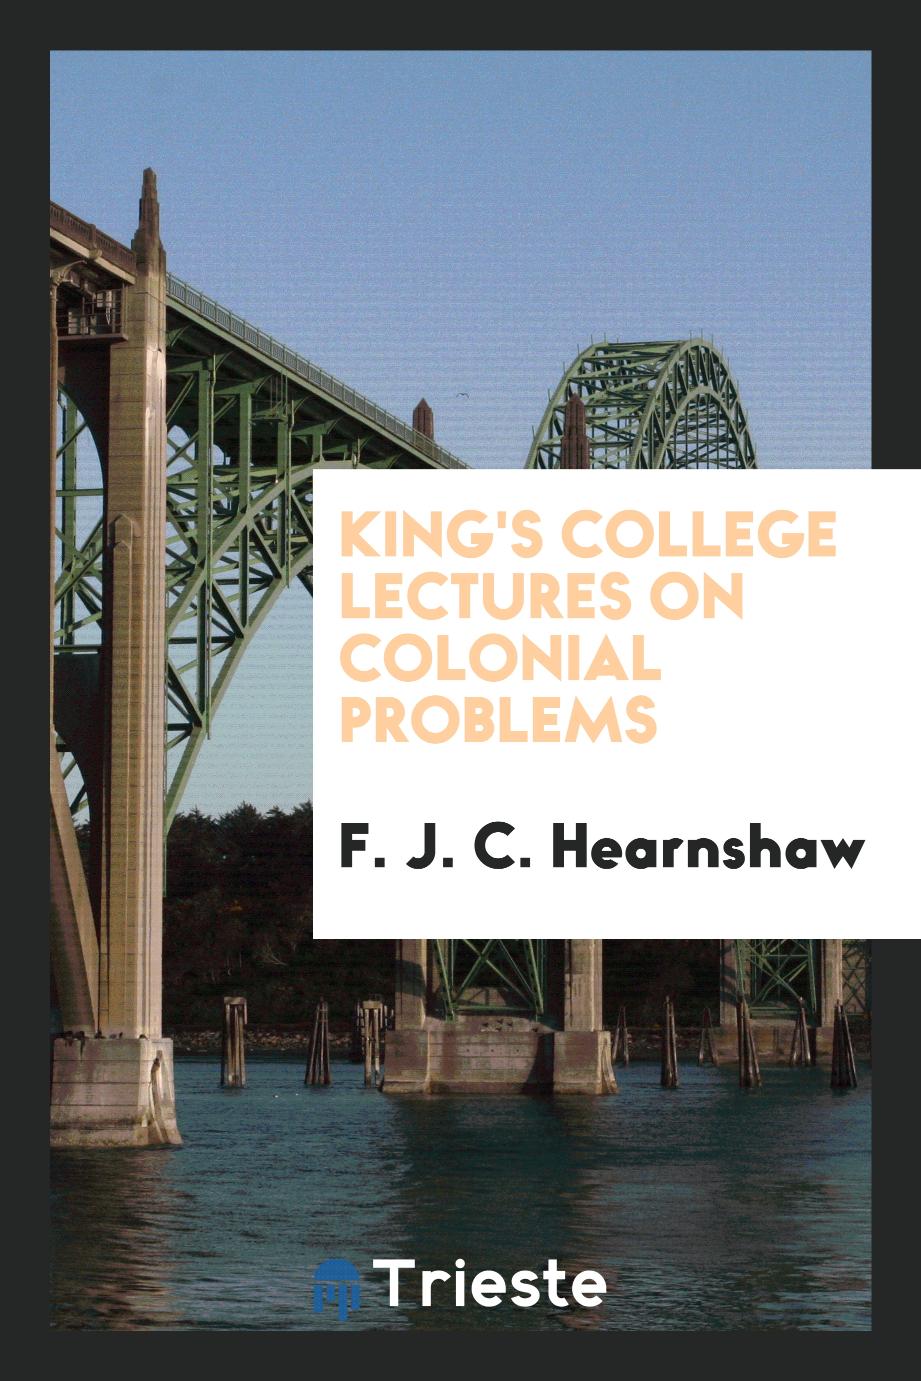 King's College Lectures on Colonial Problems